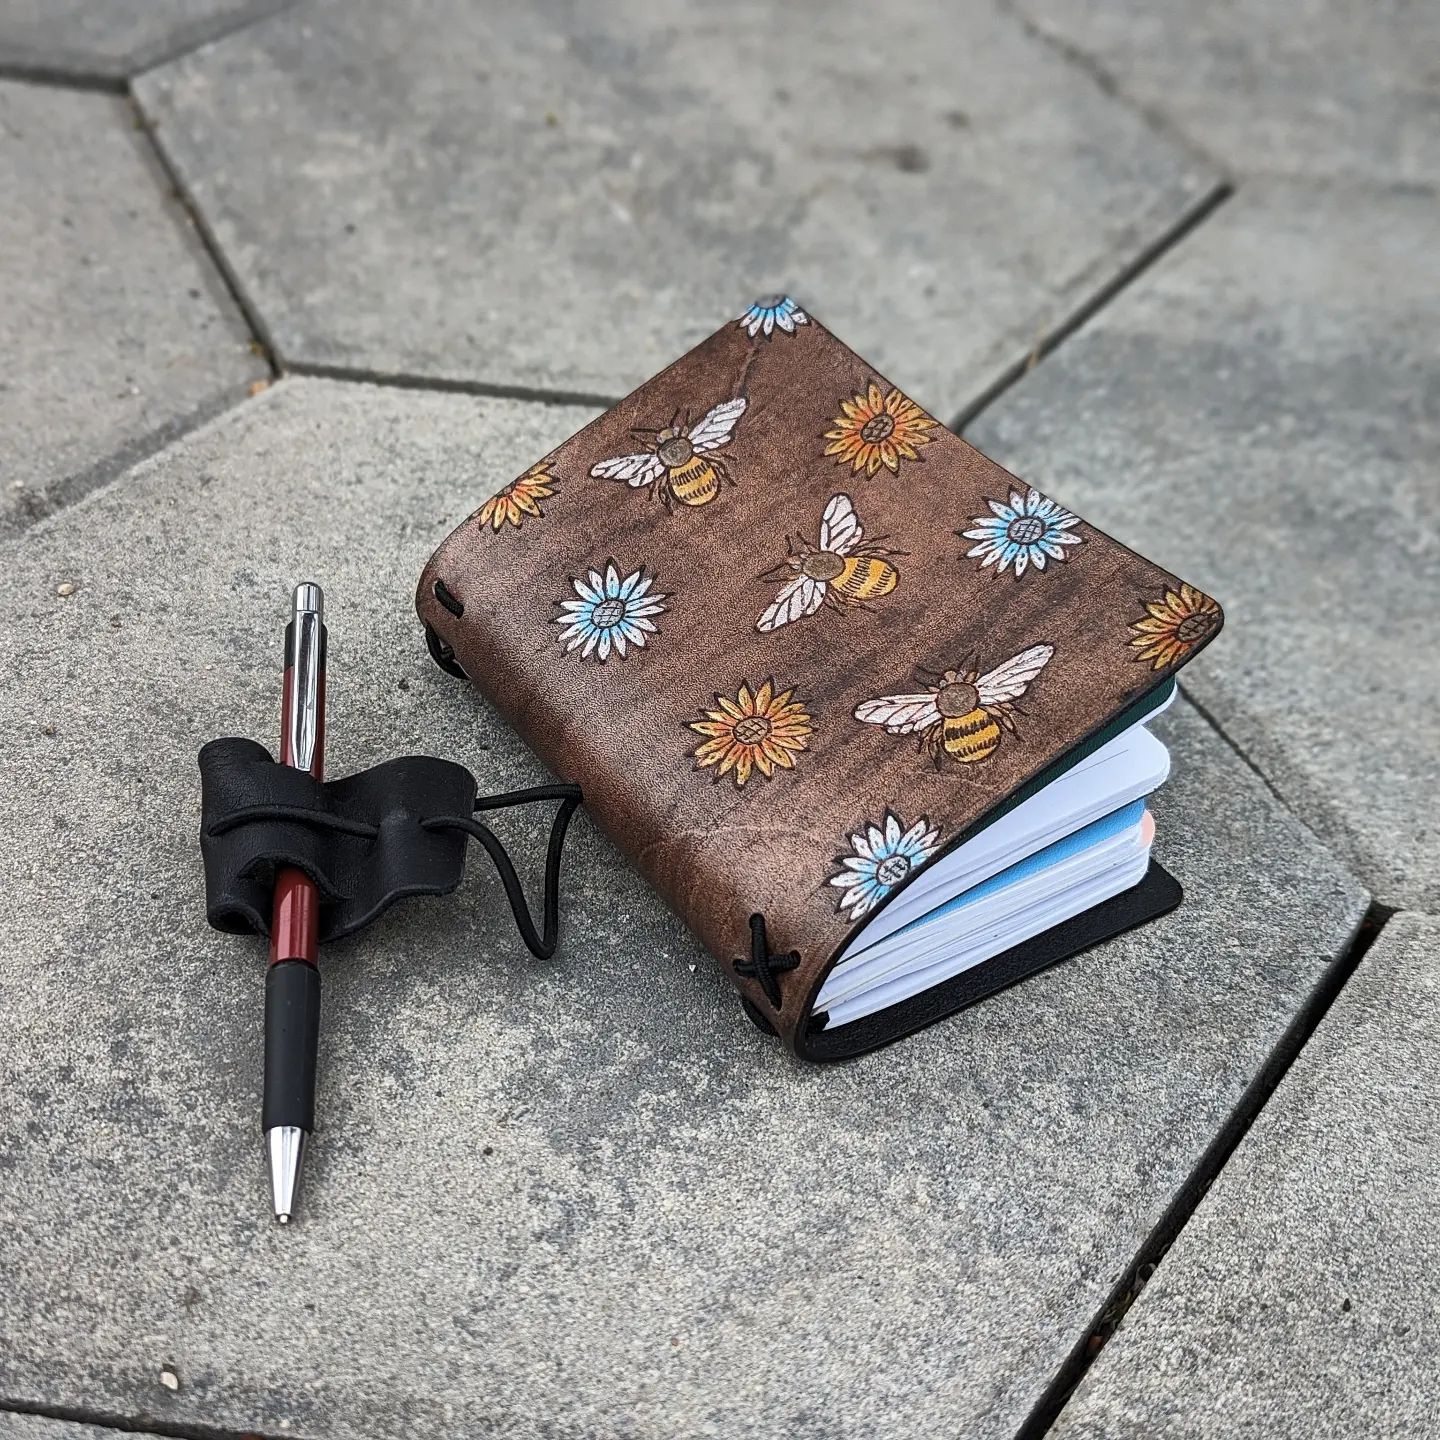 Passport-Size Fauxdori Refillable Notebook | Pyrography Bees + Flowers